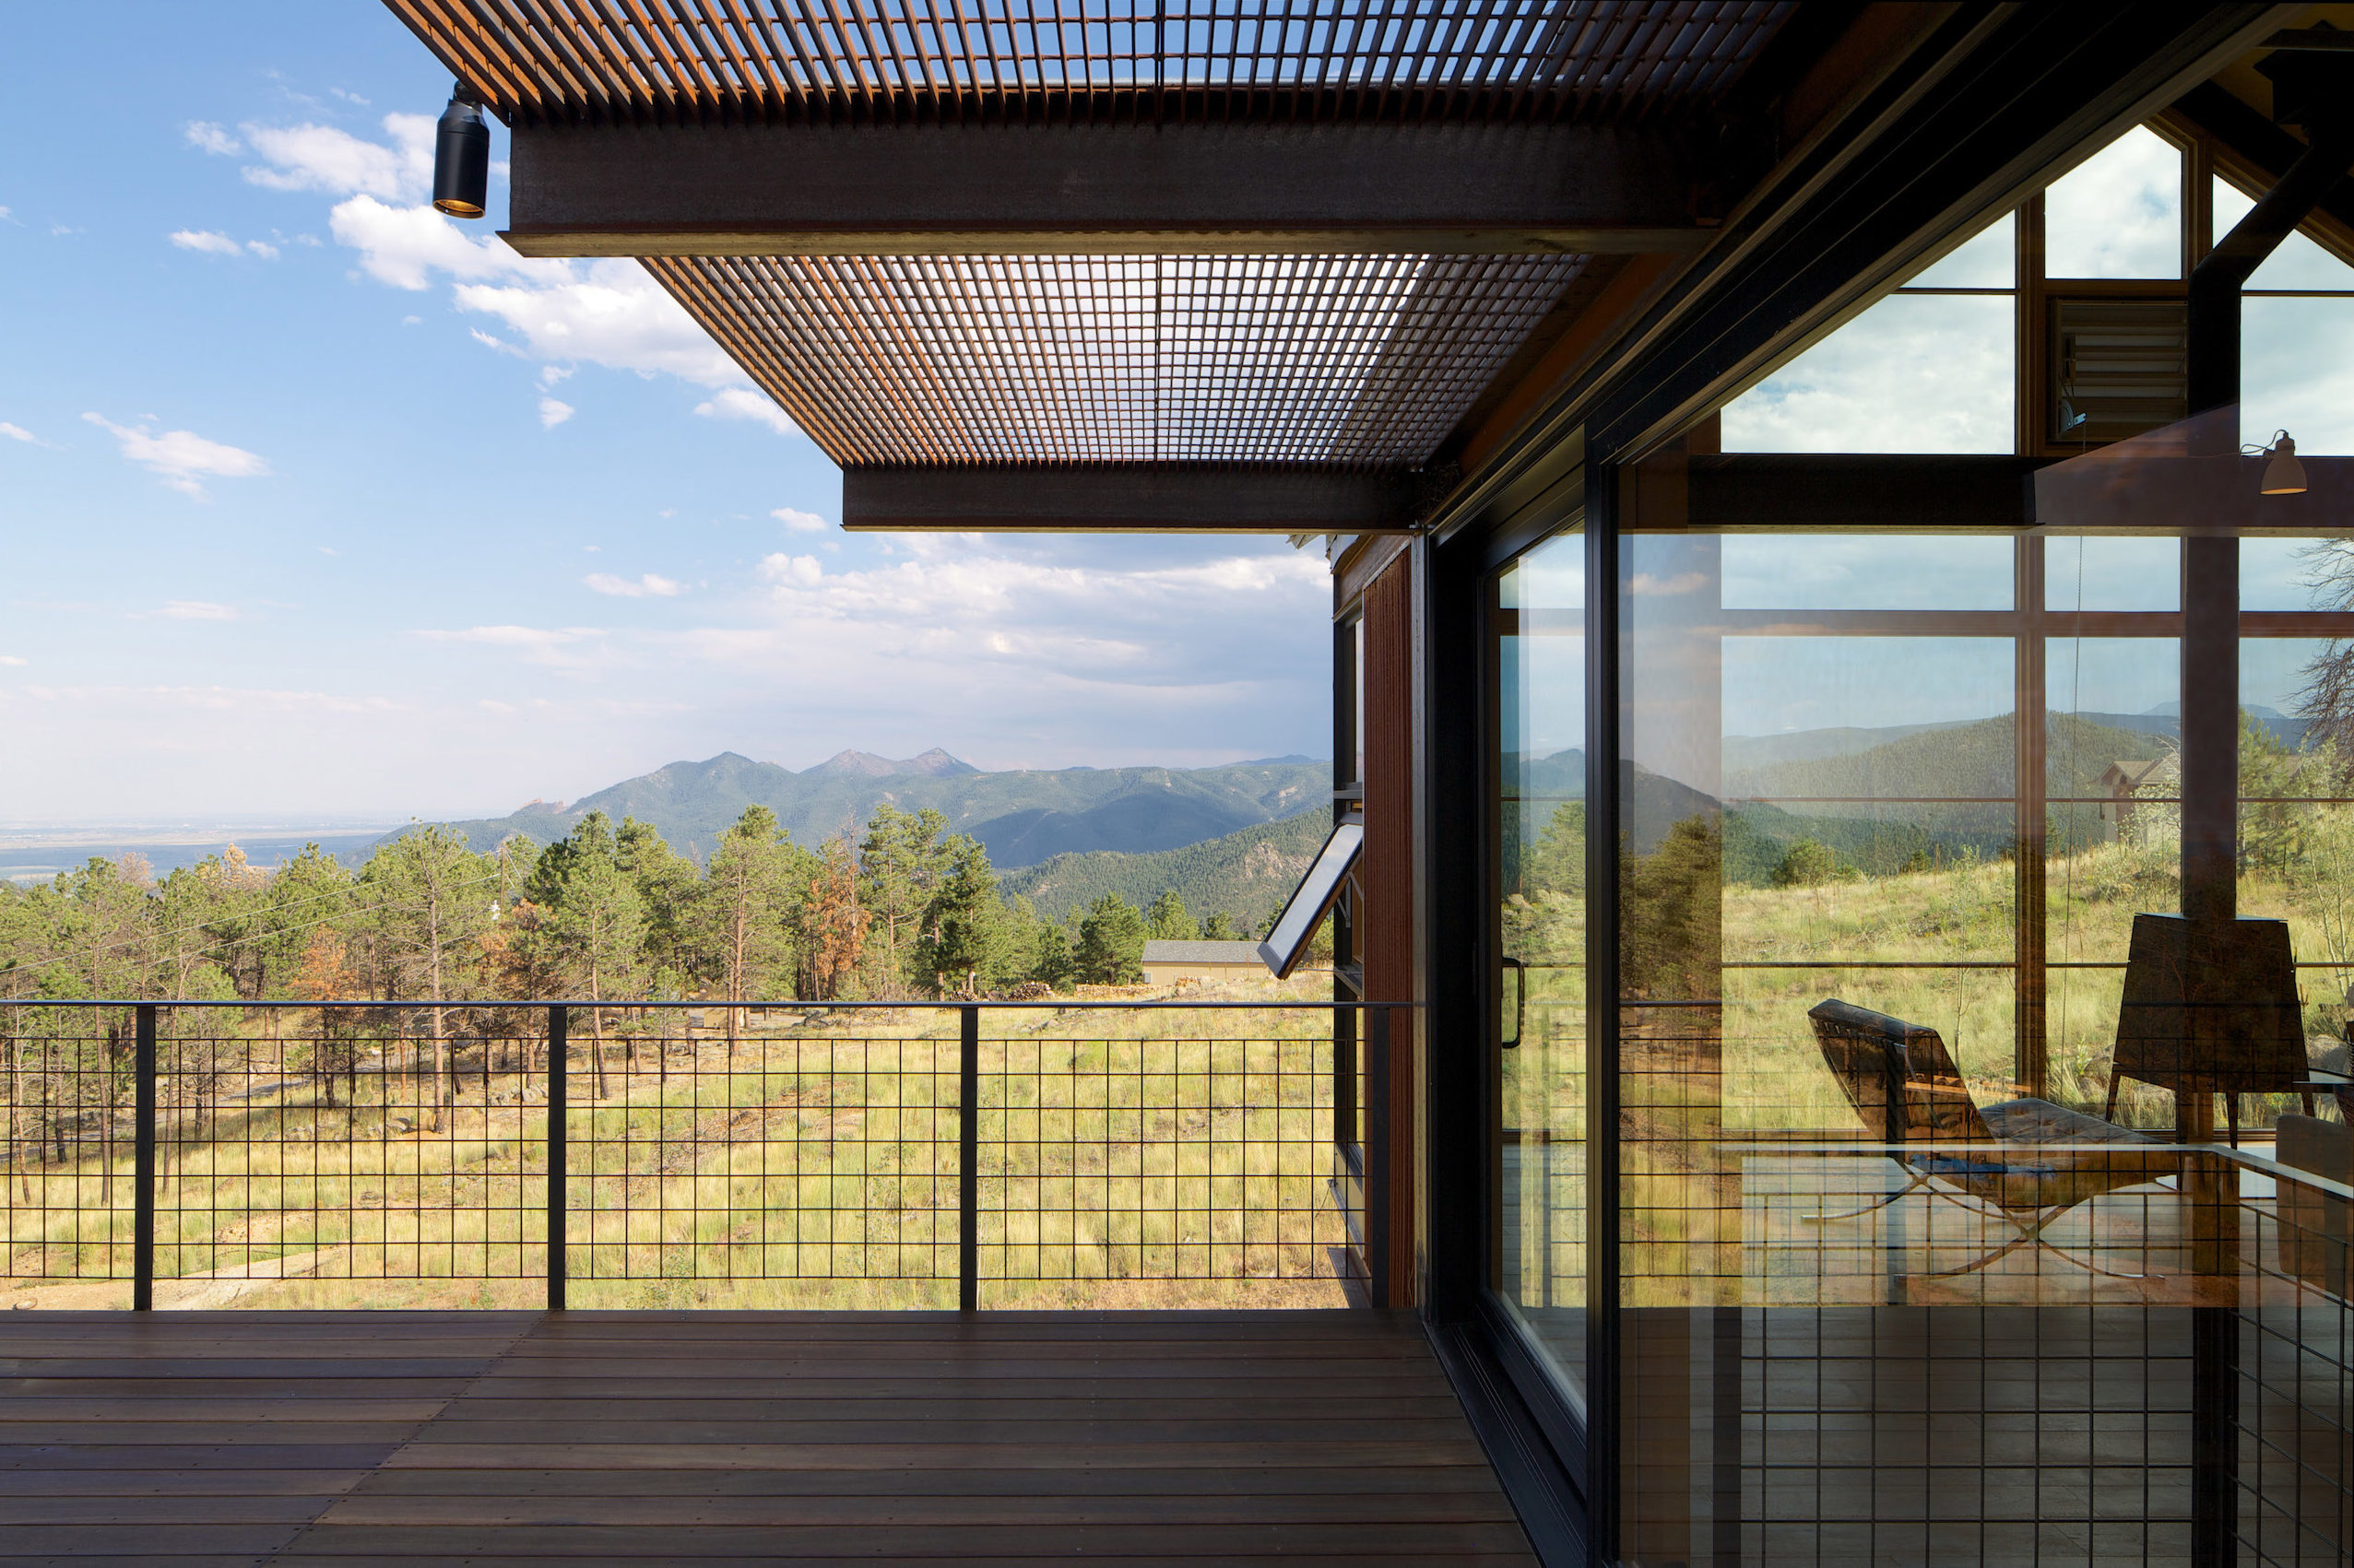 Roof deck at Sunshine Canyon House by Renée del Gaudio Architecture.